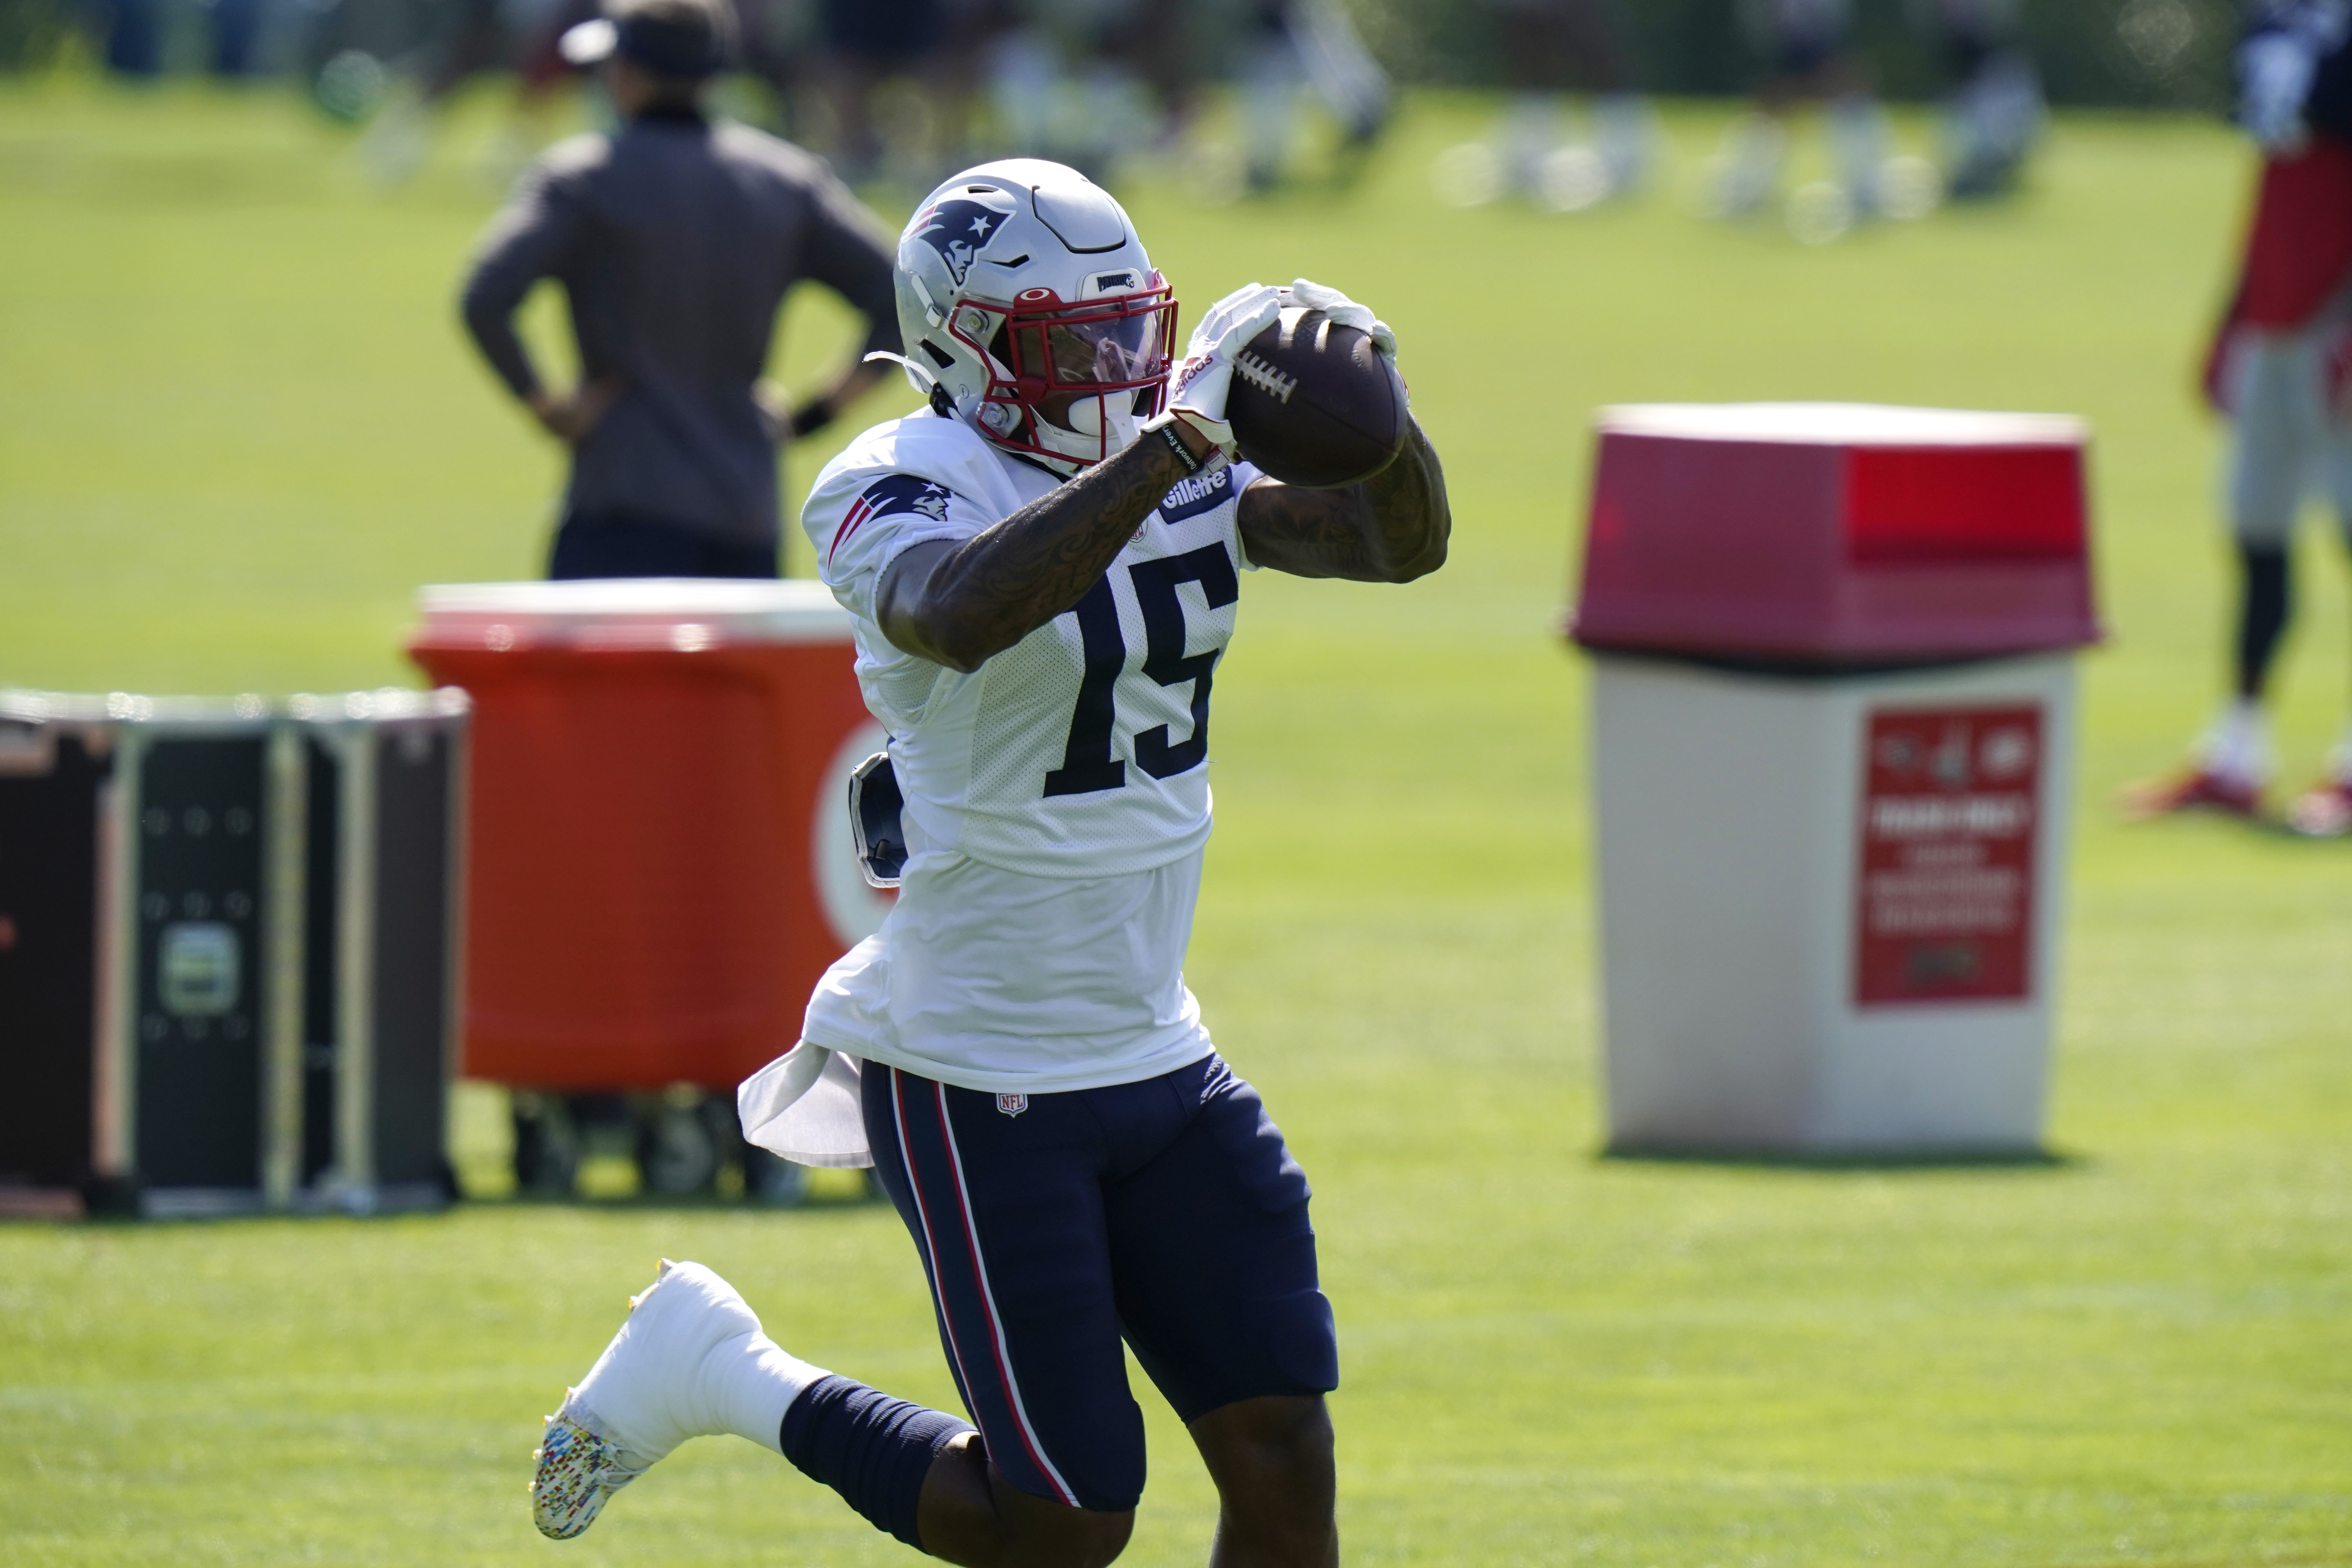 New England Patriots wide receiver N'Keal Harry makes a catch during an NFL football training camp practice, Tuesday, Aug. 18, 2020, in Foxborough, Mass. (AP Photo/Steven Senne, Pool)